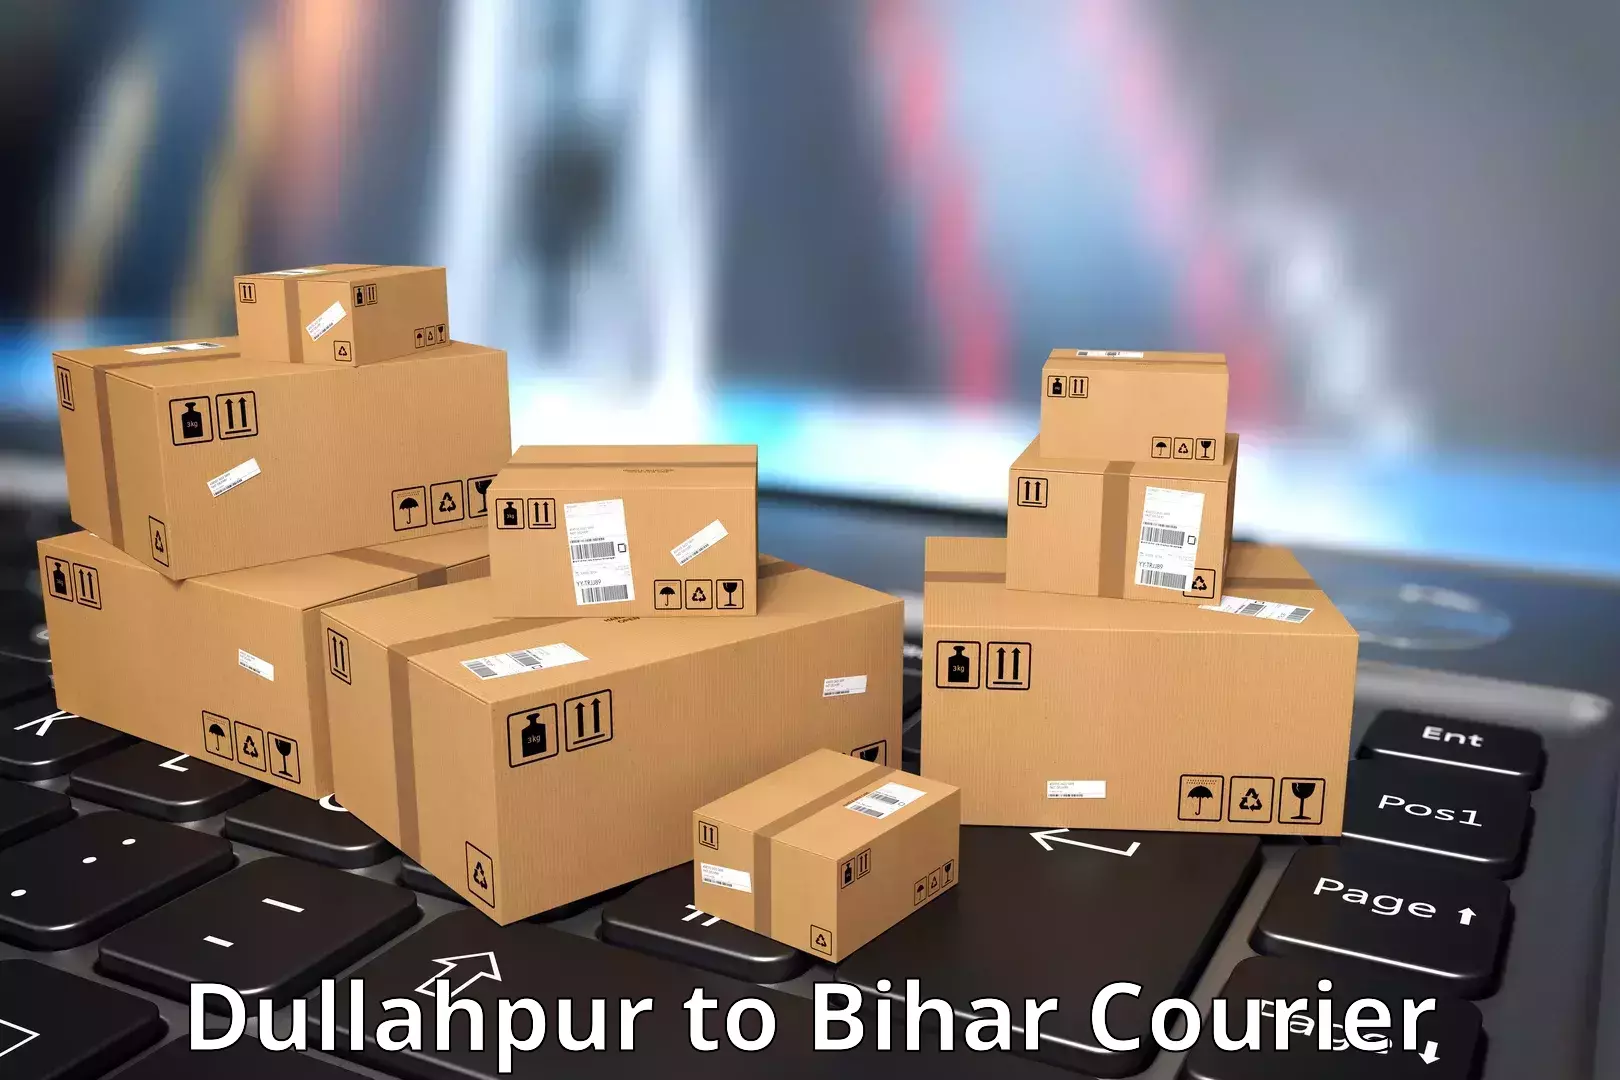 Parcel handling and care Dullahpur to Bihar